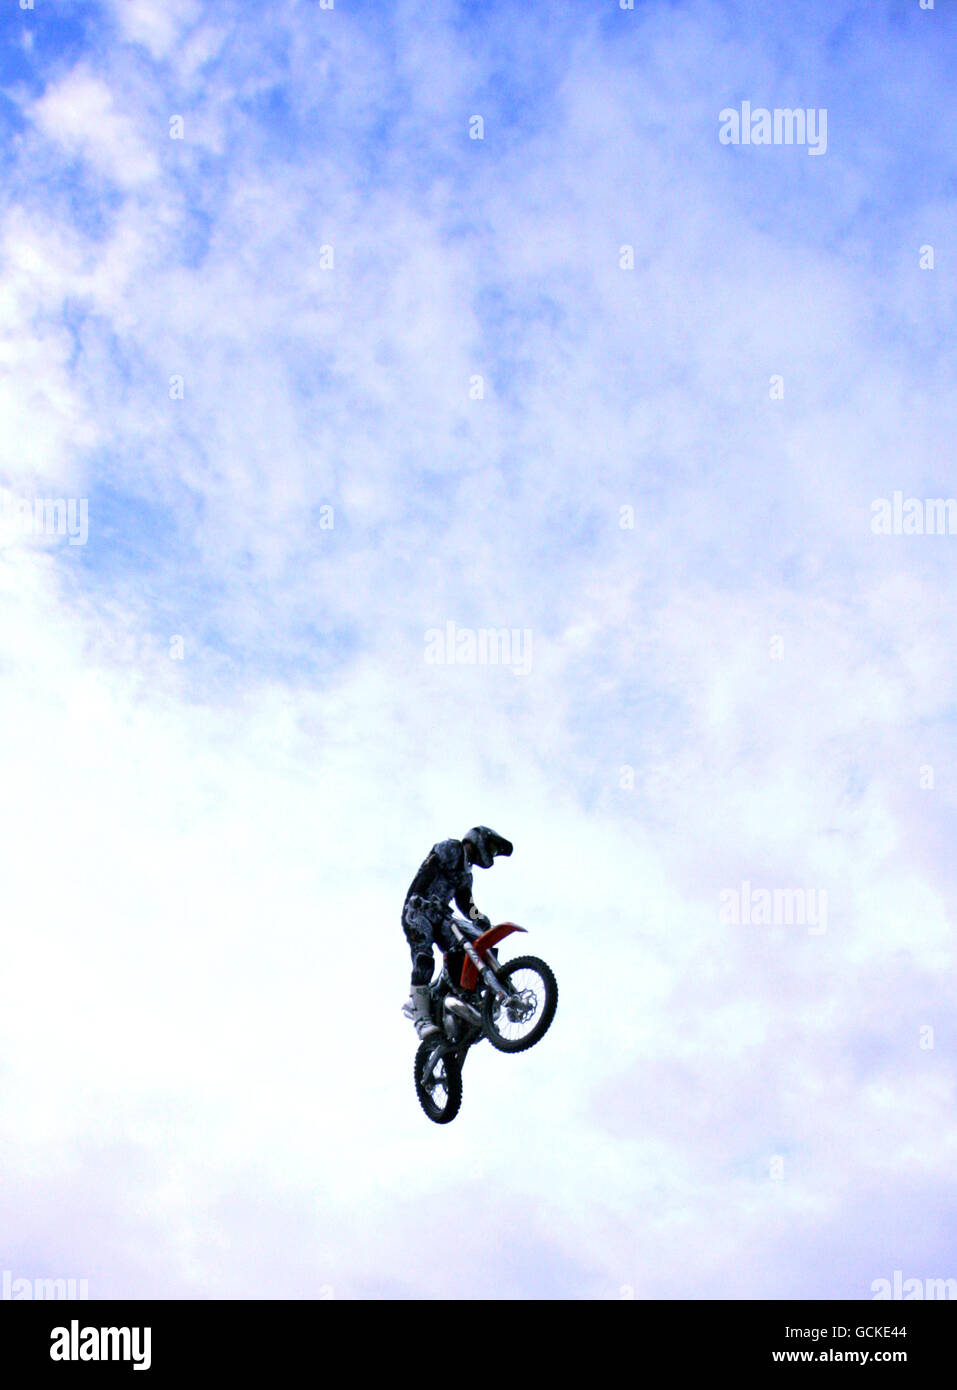 Reiter in Aktion bei den Red Bull X-Fighters Jams auf dem Old Market Square in Nottingham. Stockfoto